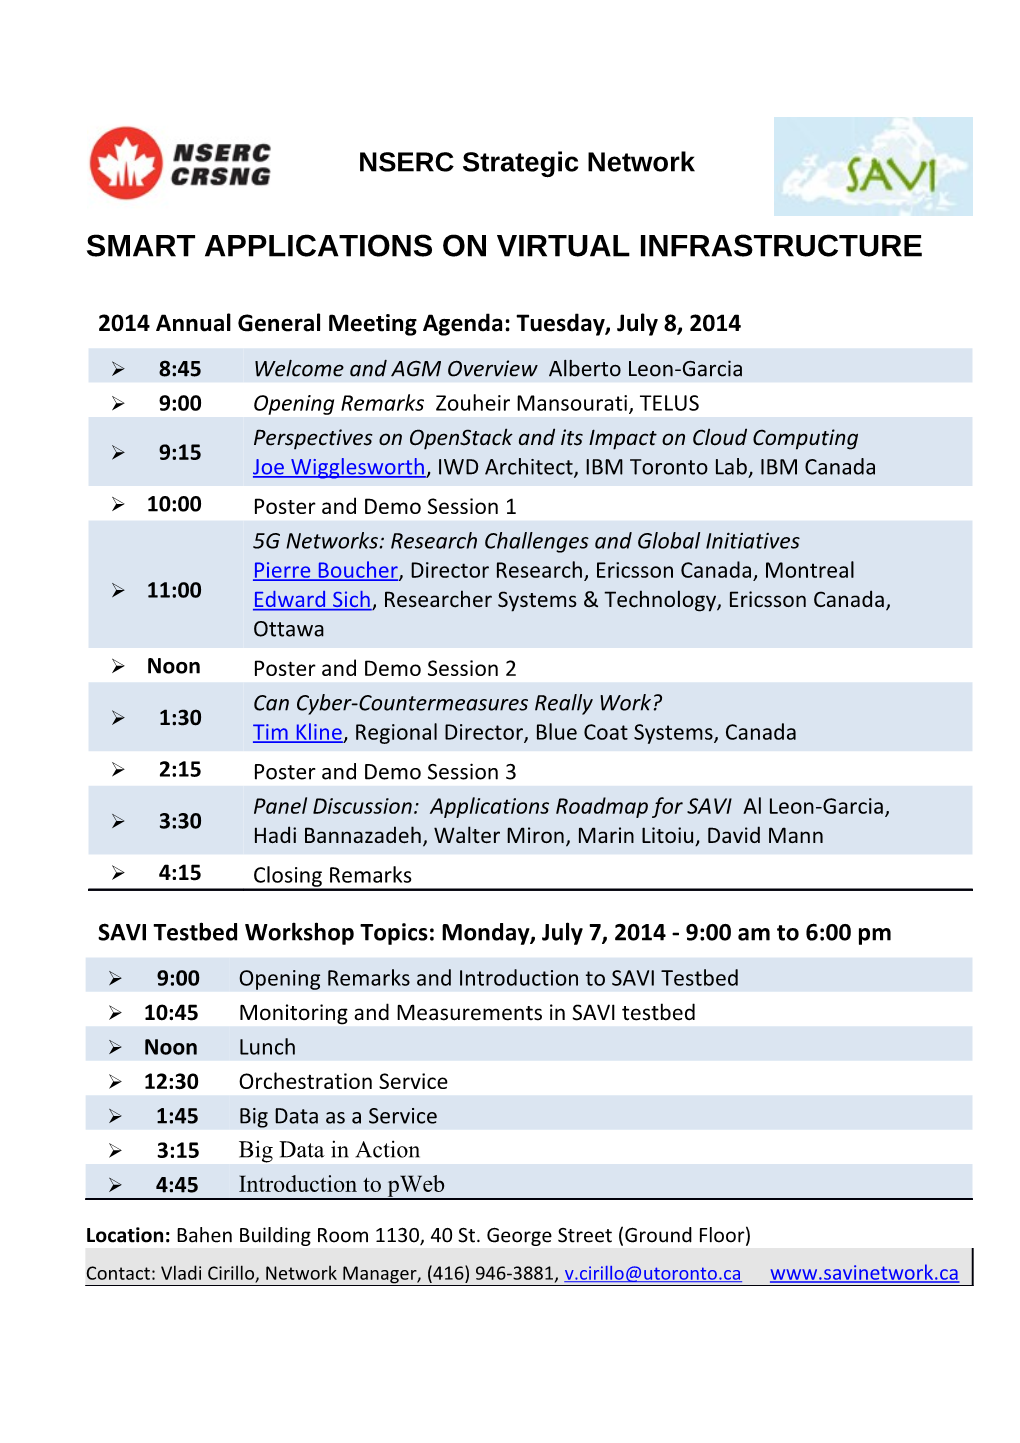 Smart Applications on Virtual Infrastructure